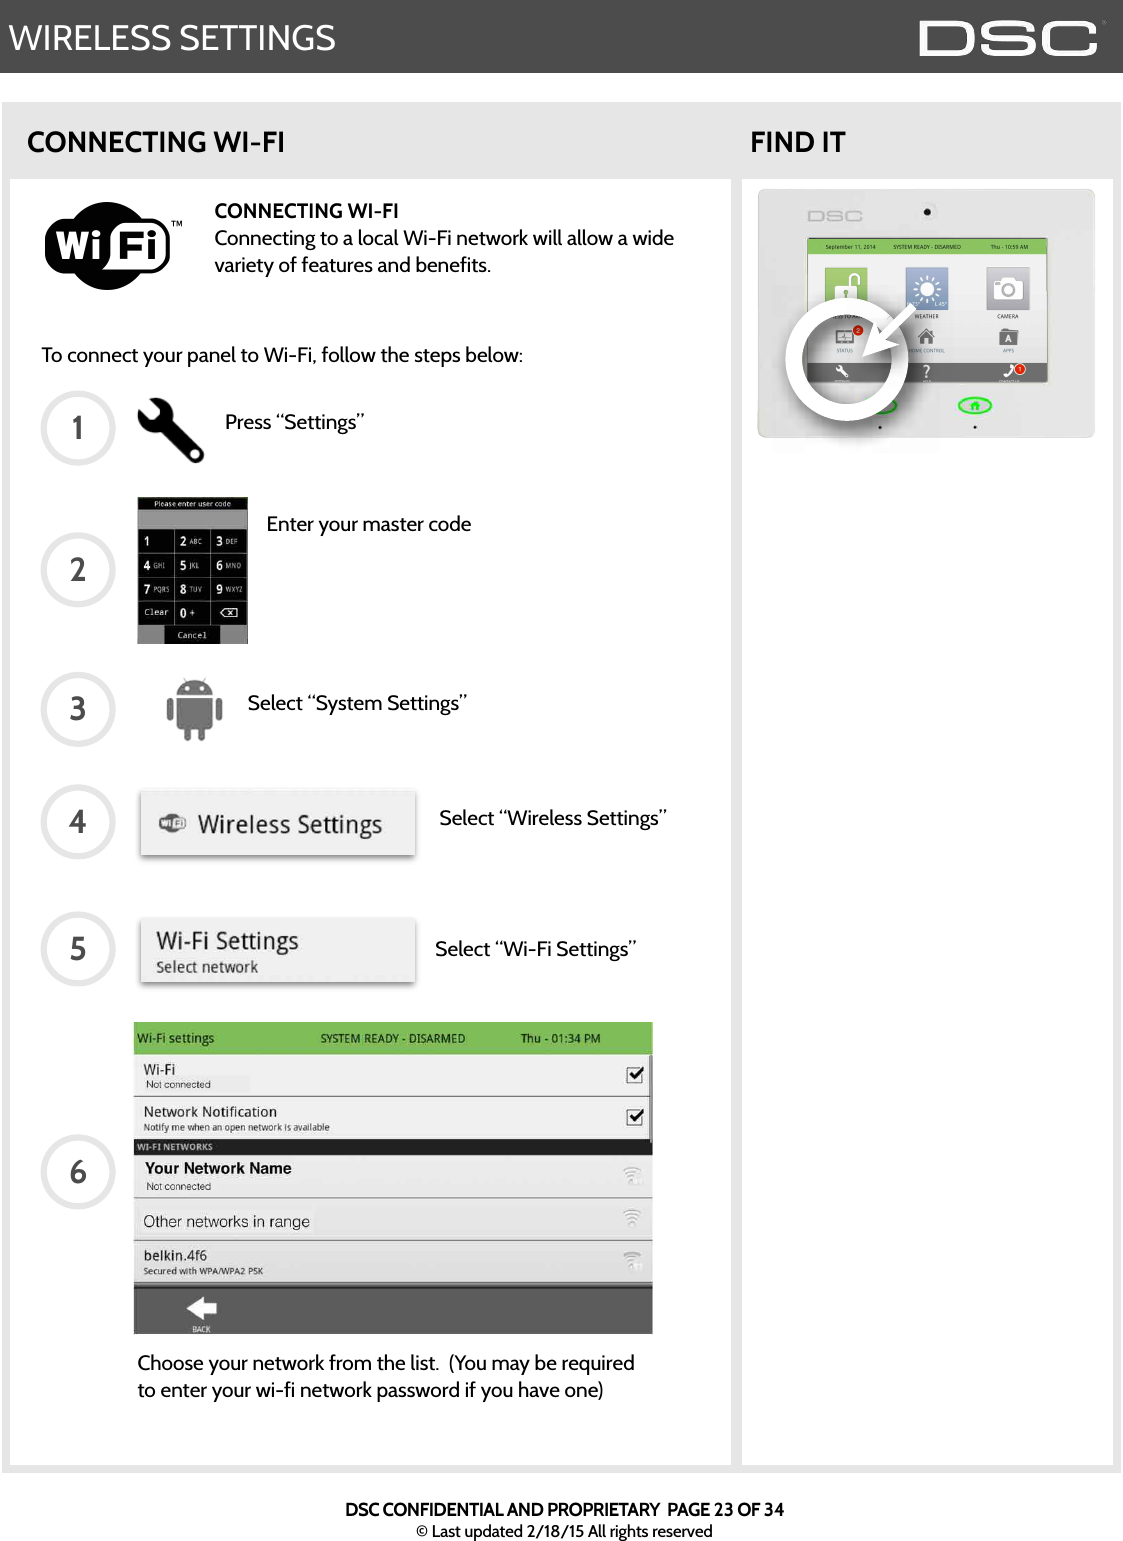 WIRELESS SETTINGSCONNECTING WI-FITo connect your panel to Wi-Fi, follow the steps below:CONNECTING WI-FIConnecting to a local Wi-Fi network will allow a wide variety of features and benefits.FIND ITPress “Settings”Enter your master codeSelect “System Settings”Select “Wireless Settings”Select “Wi-Fi Settings”123456Choose your network from the list.  (You may be required to enter your wi-fi network password if you have one)DSC CONFIDENTIAL AND PROPRIETARY  PAGE 23 OF 34© Last updated 2/18/15 All rights reserved